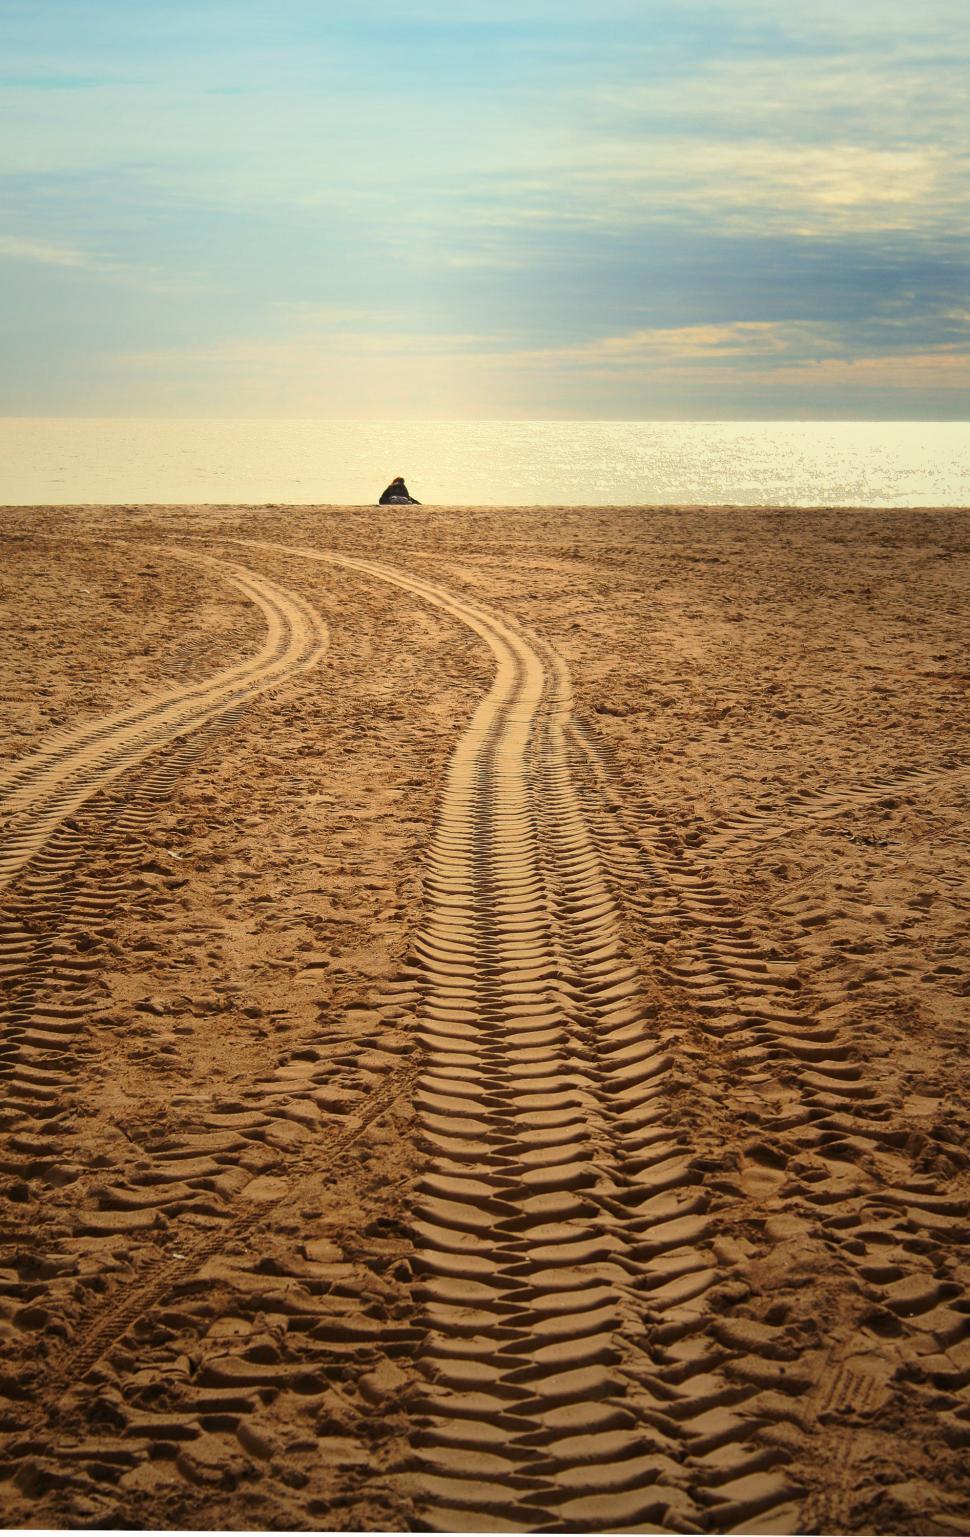 Free Image of Tire Track in the Sand on a Beach 